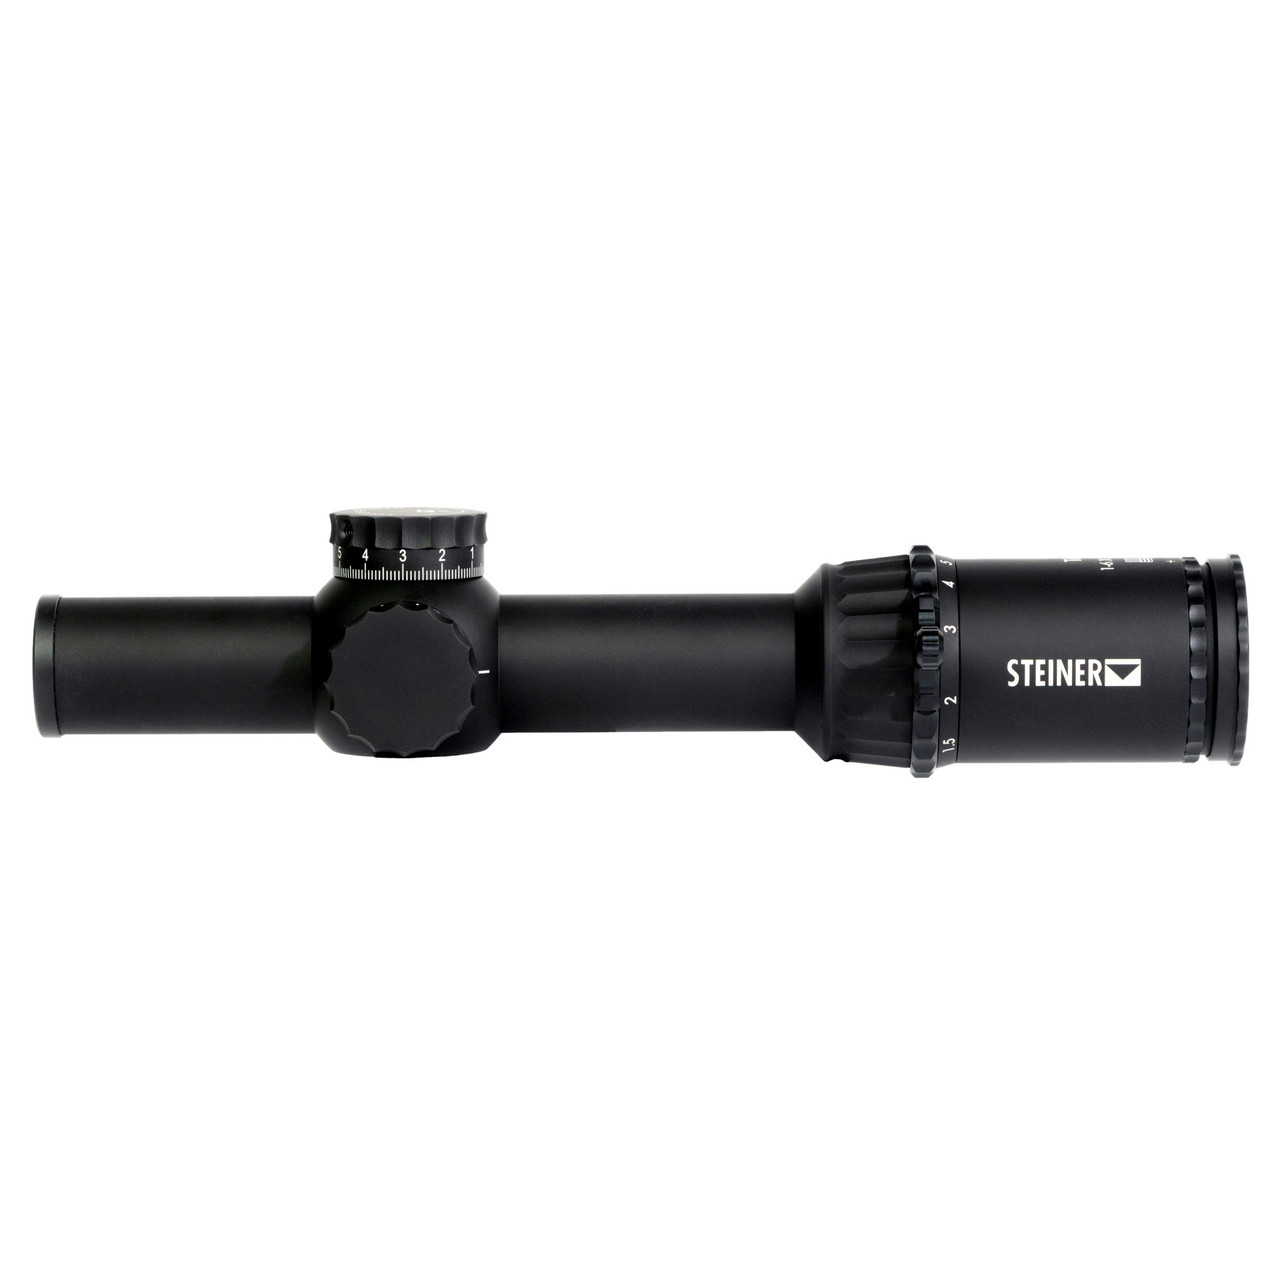 Steiner 5103 T6Xi, Rifle Scope, 1-6X, 24mm Objective, 30mm Tube Diameter, KC-1 Reticle, 1/4 MOA, First Focal Plane, Matte Finish, Black